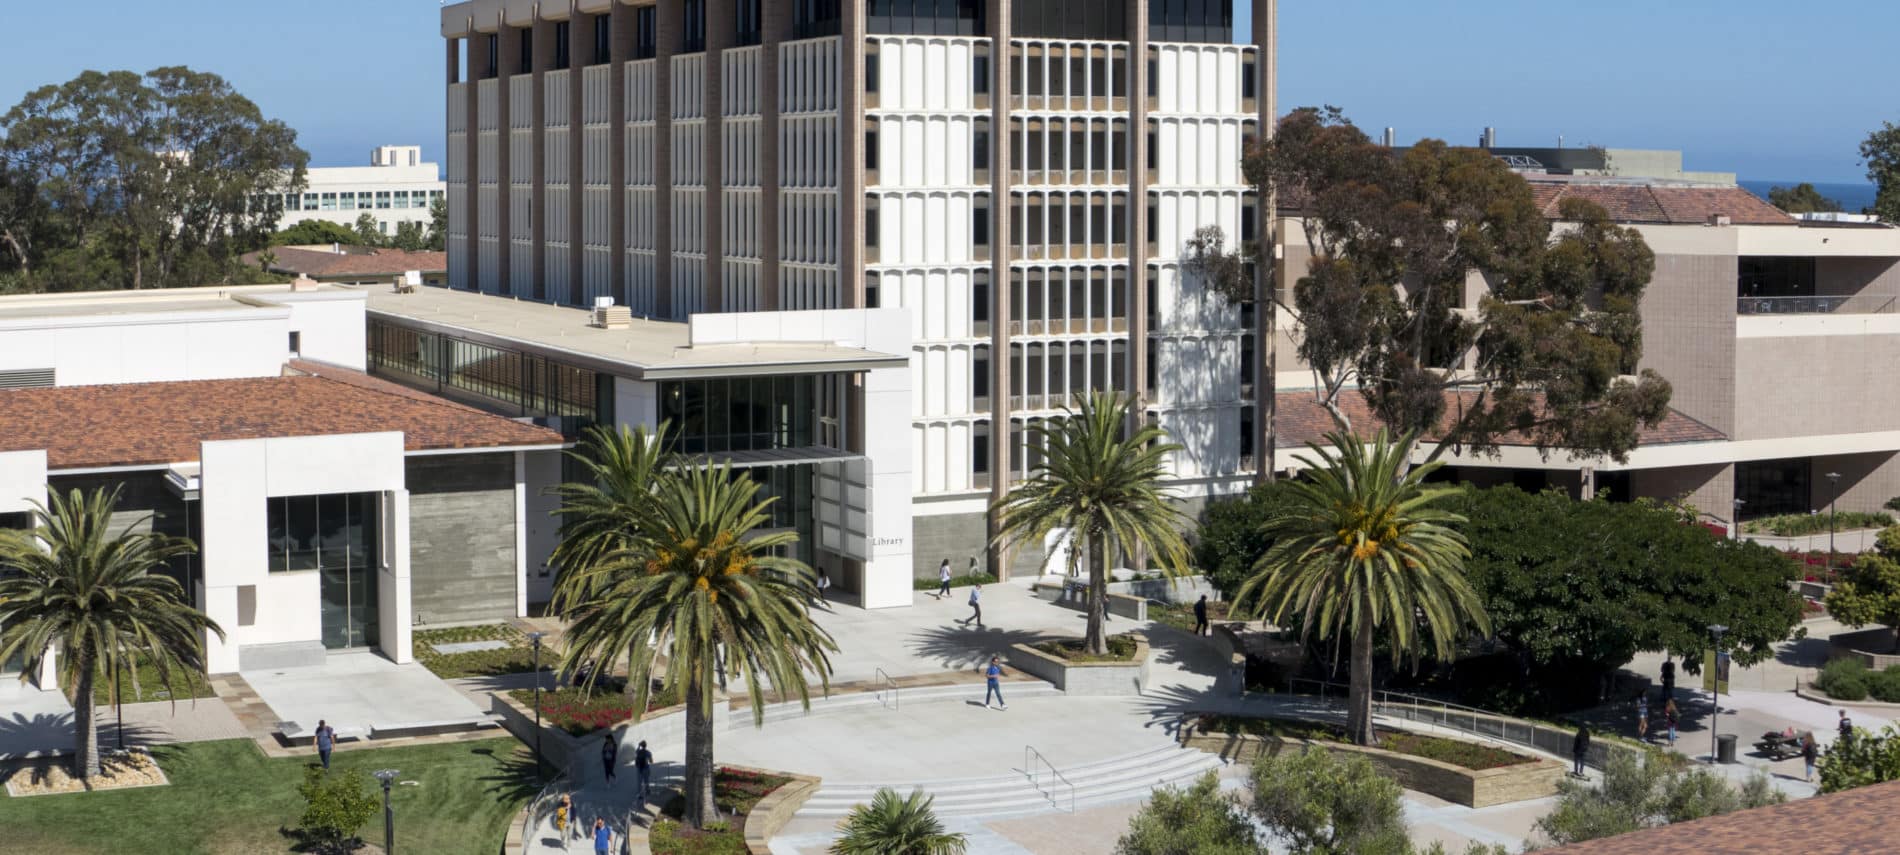 Exterior aerial view of University of California Santa Barbara Library amidst palm trees and blue skies